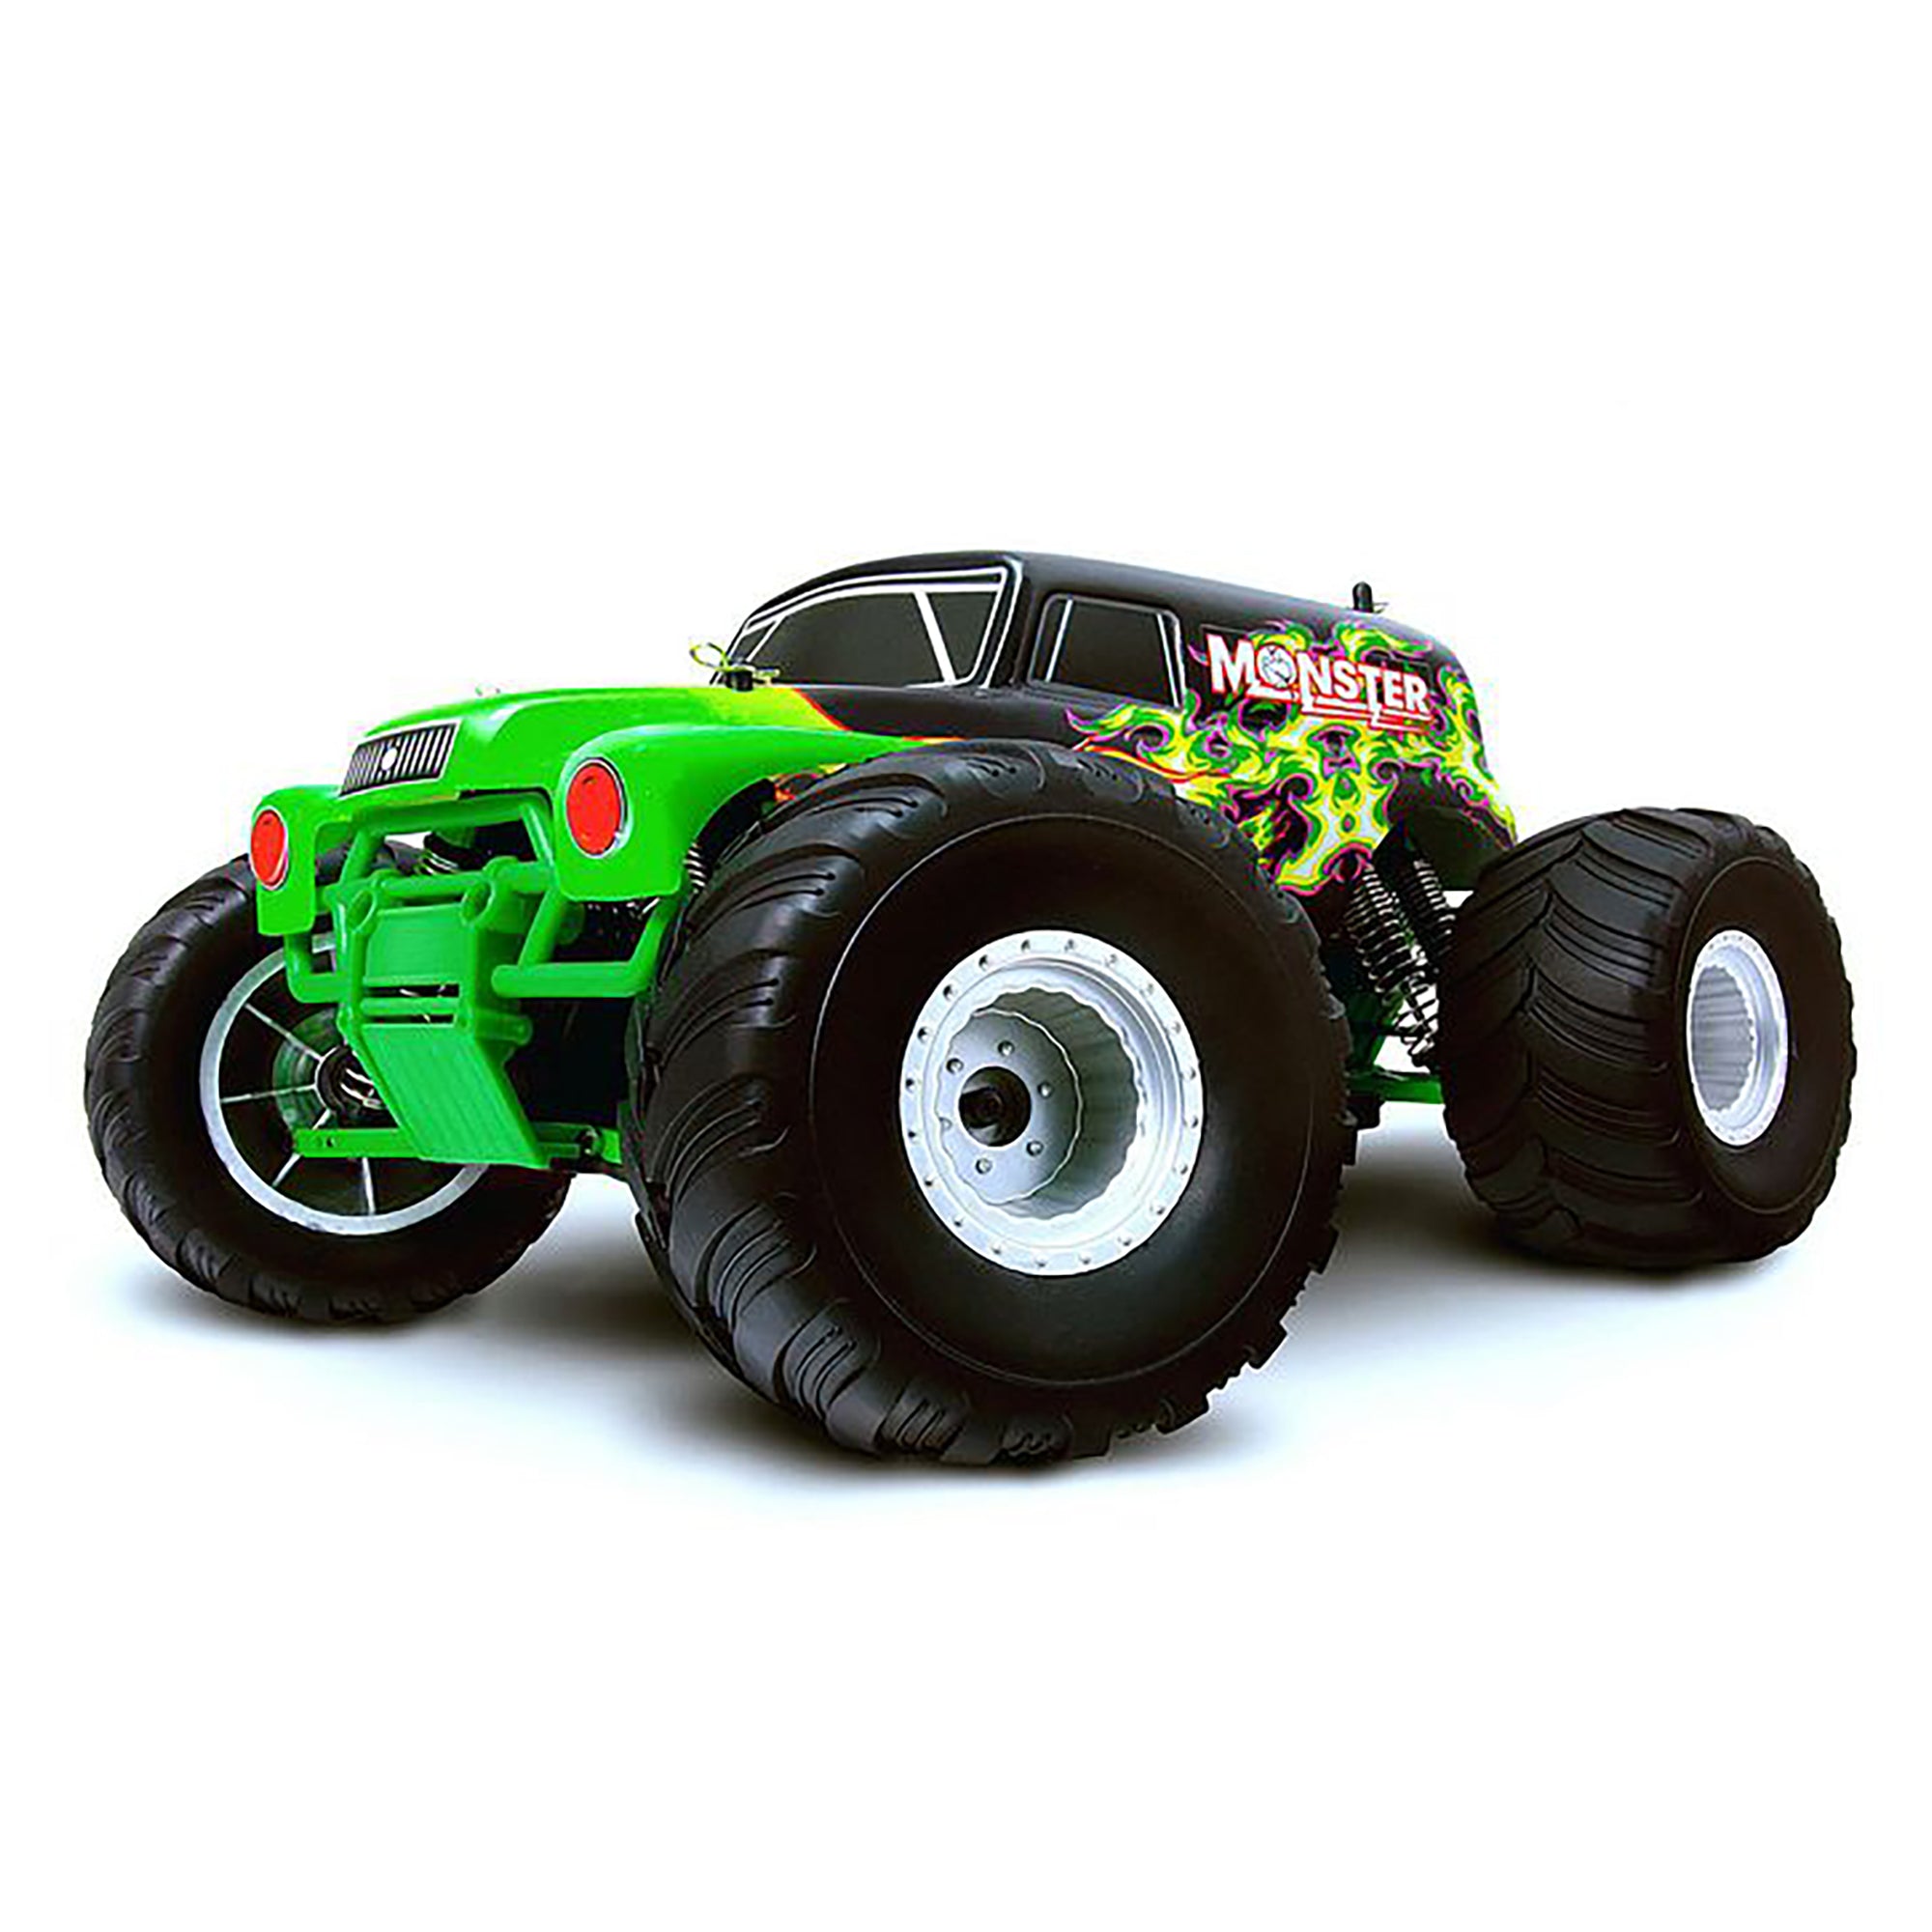 HSP Racing Monster Truck Special Edition Green 2.4GHz Electric 4WD Off Road RTR RC Truck